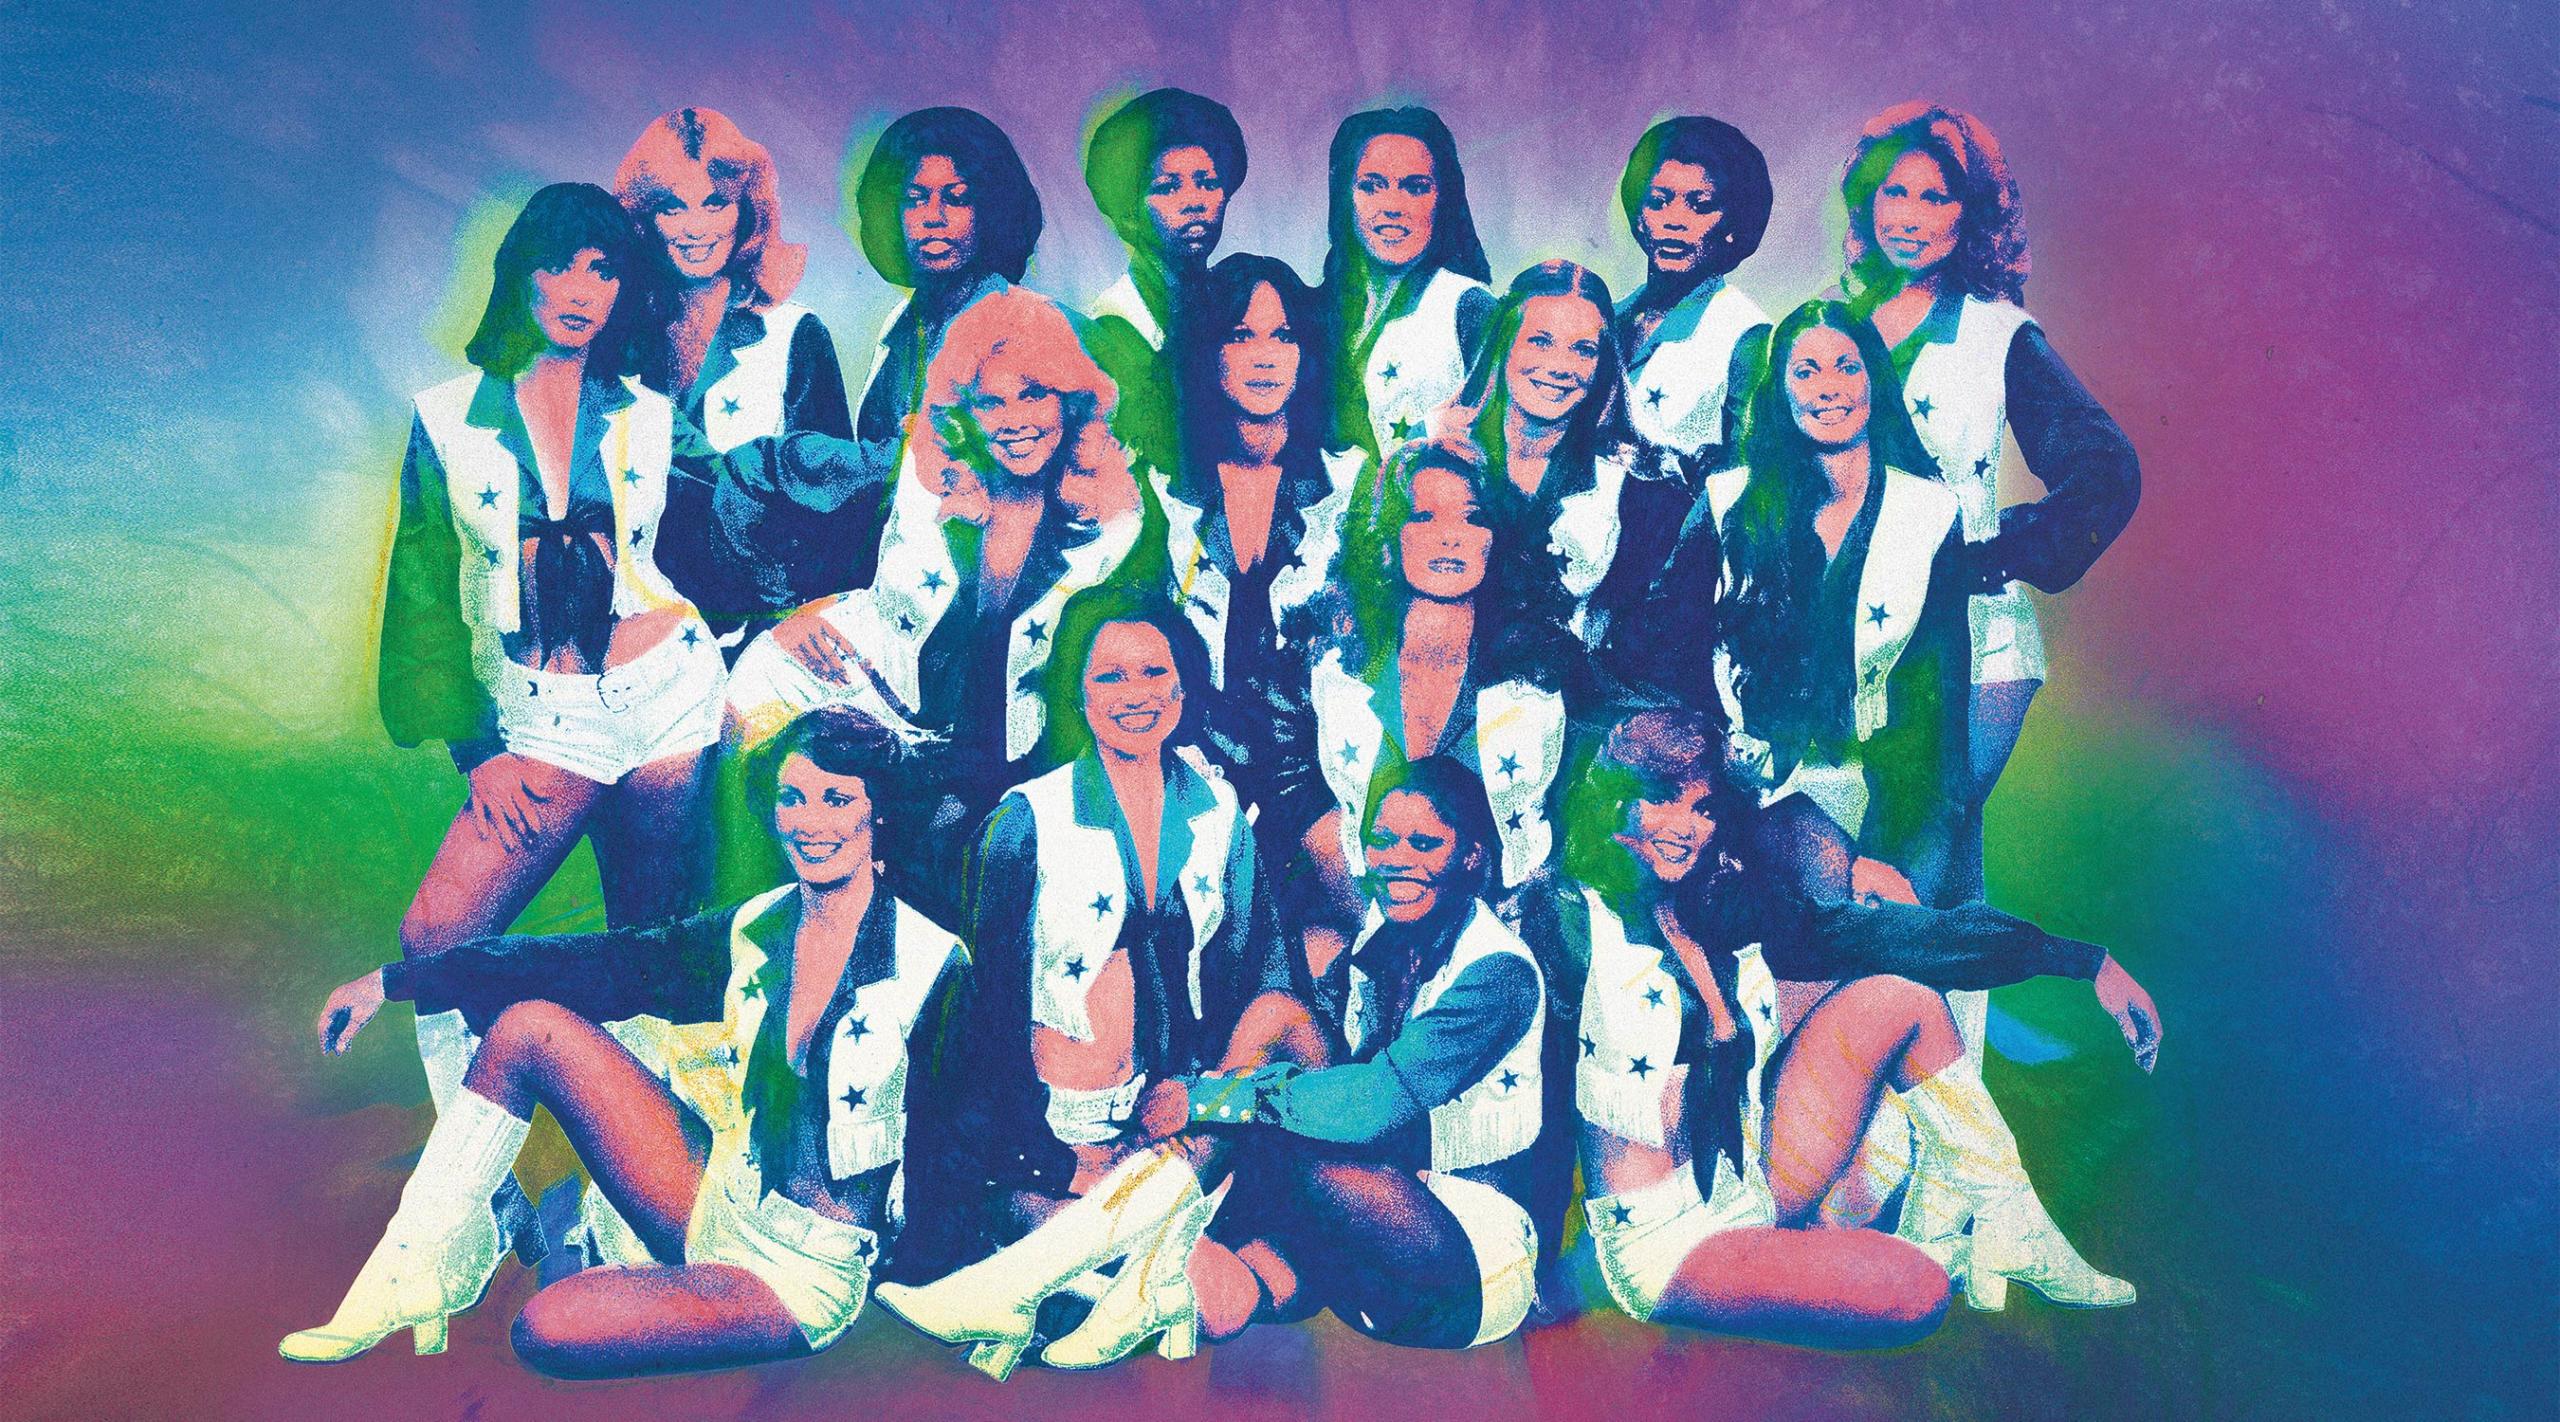 Sex, Scandal, and Sisterhood Fifty Years of the Dallas Cowboys Cheerleaders